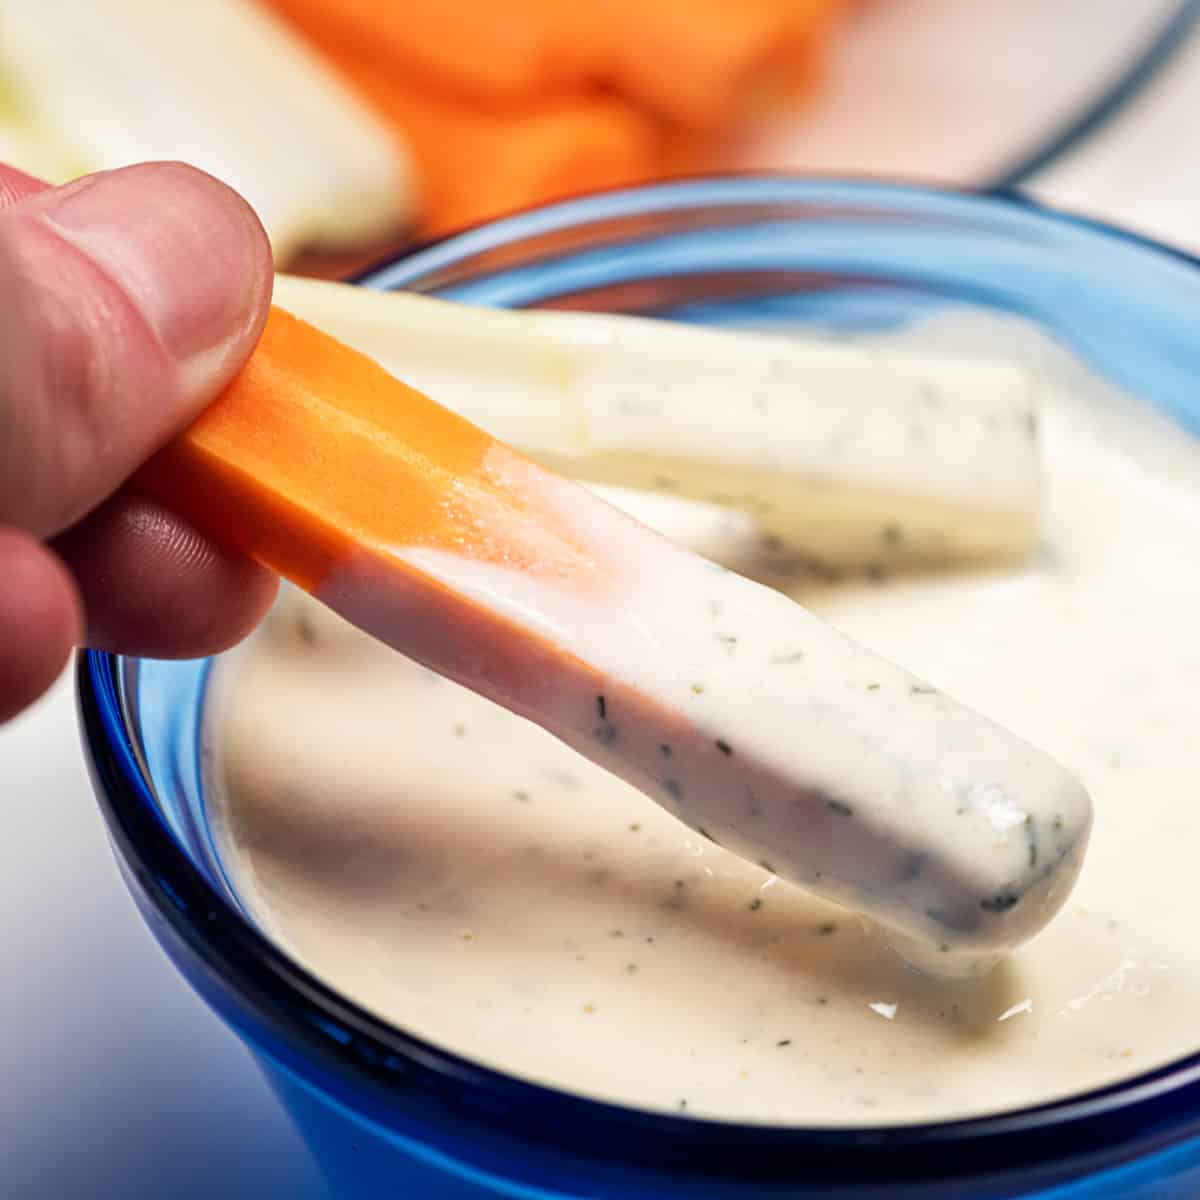 Dish of vegan ranch dressing with a carrot stick and celery stick dipped in it.